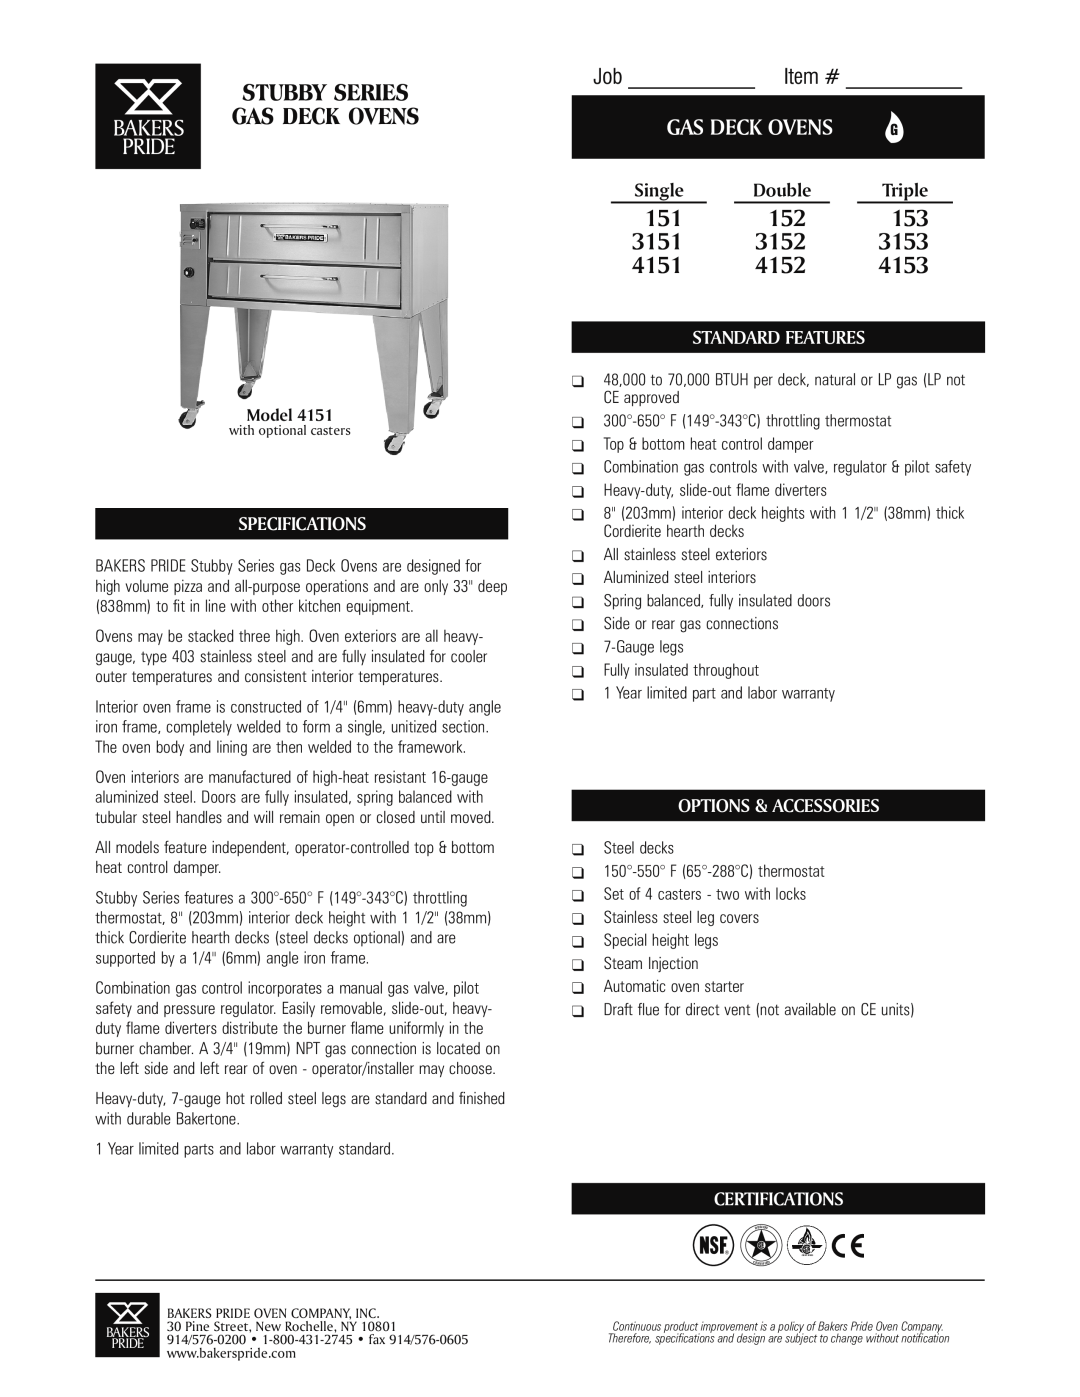 Bakers Pride Oven 4151 specifications Stubby Series Gas Deck Ovens, 3151, 3152, 3153, 4152, 4153, Bakers Pride, Job Item # 